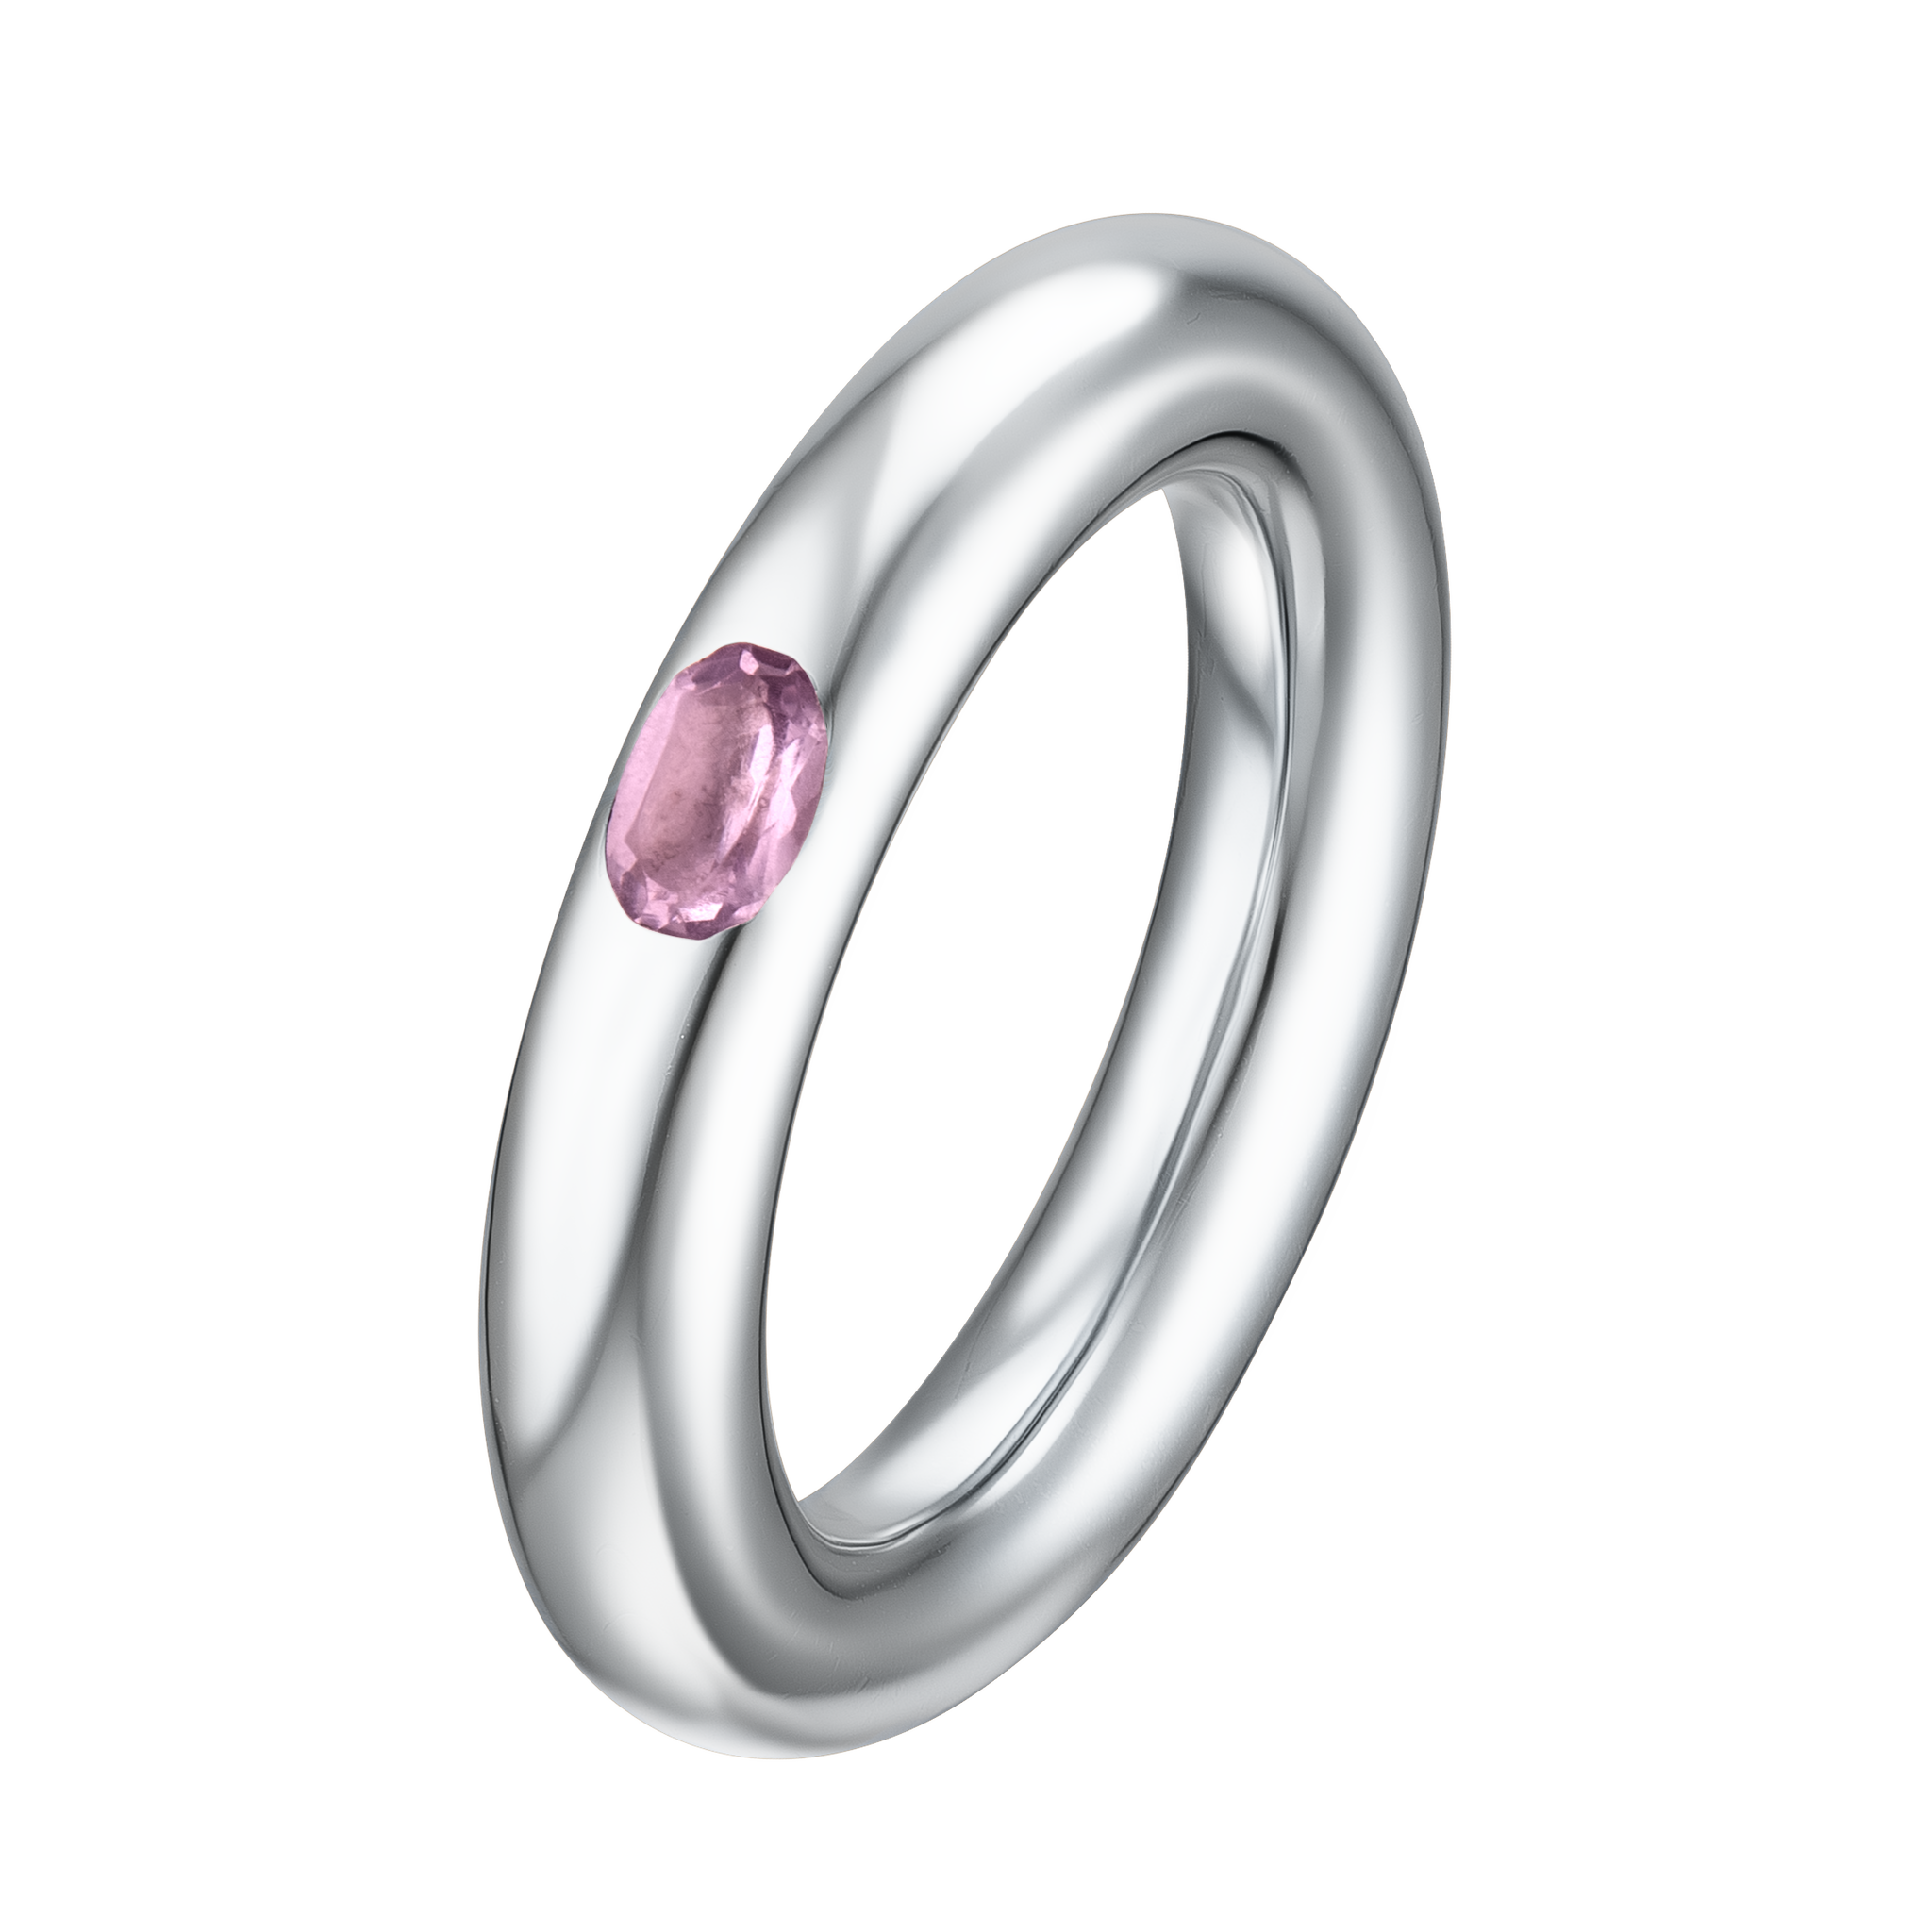 Puffy violet ring